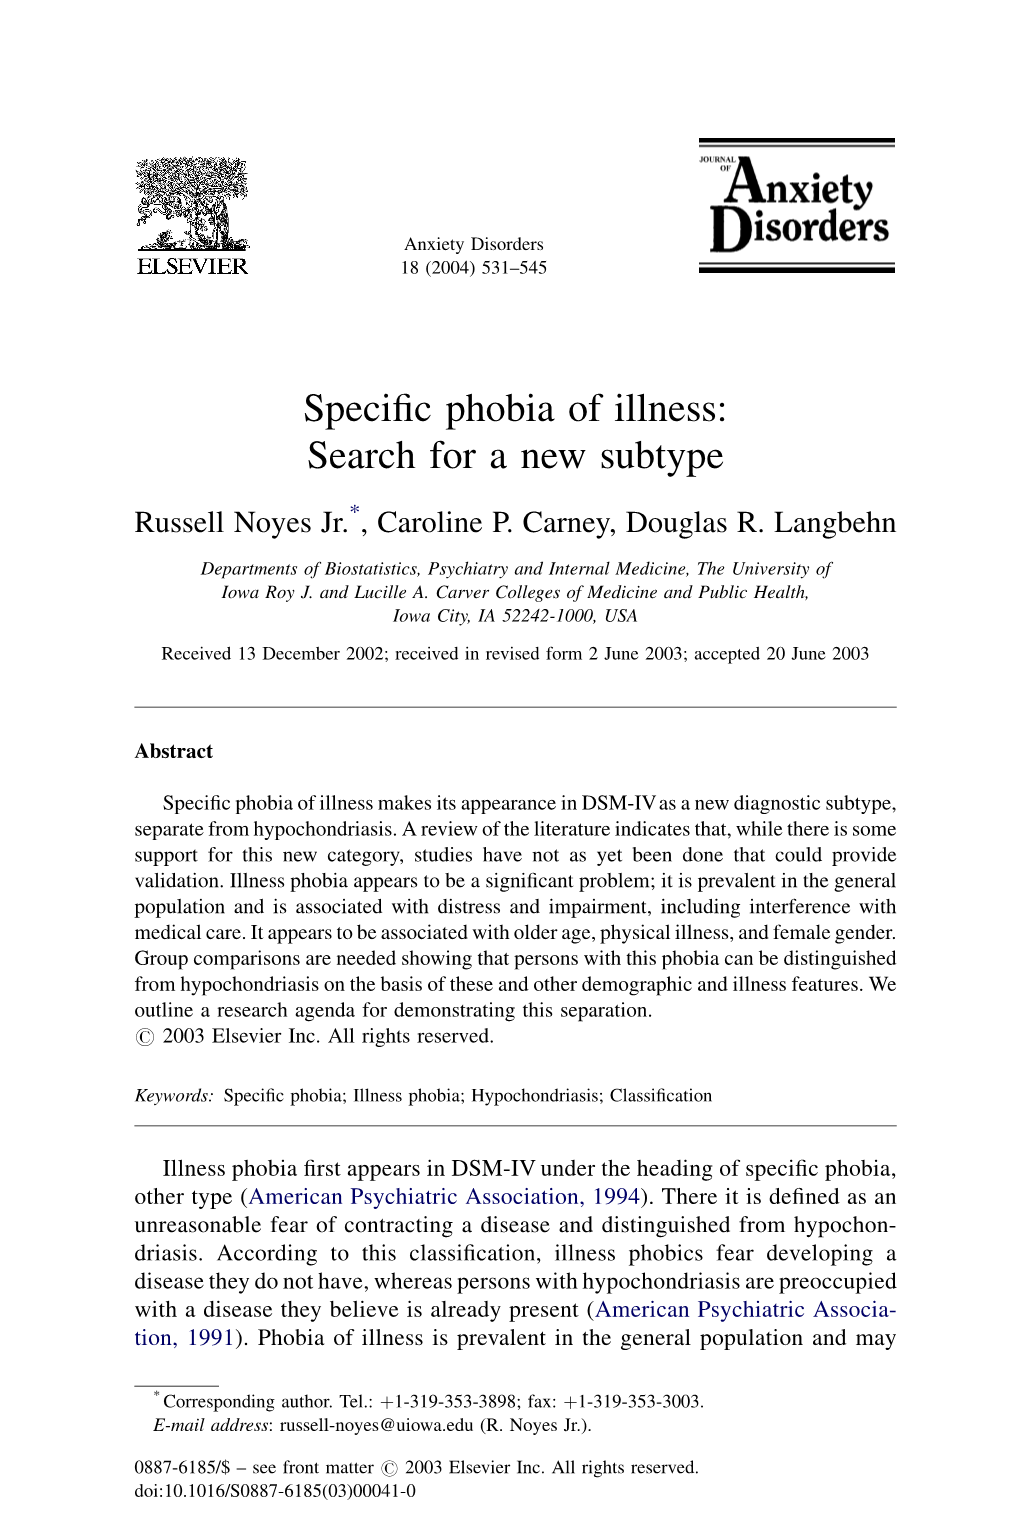 Specific Phobia of Illness:: Search for a New Subtype